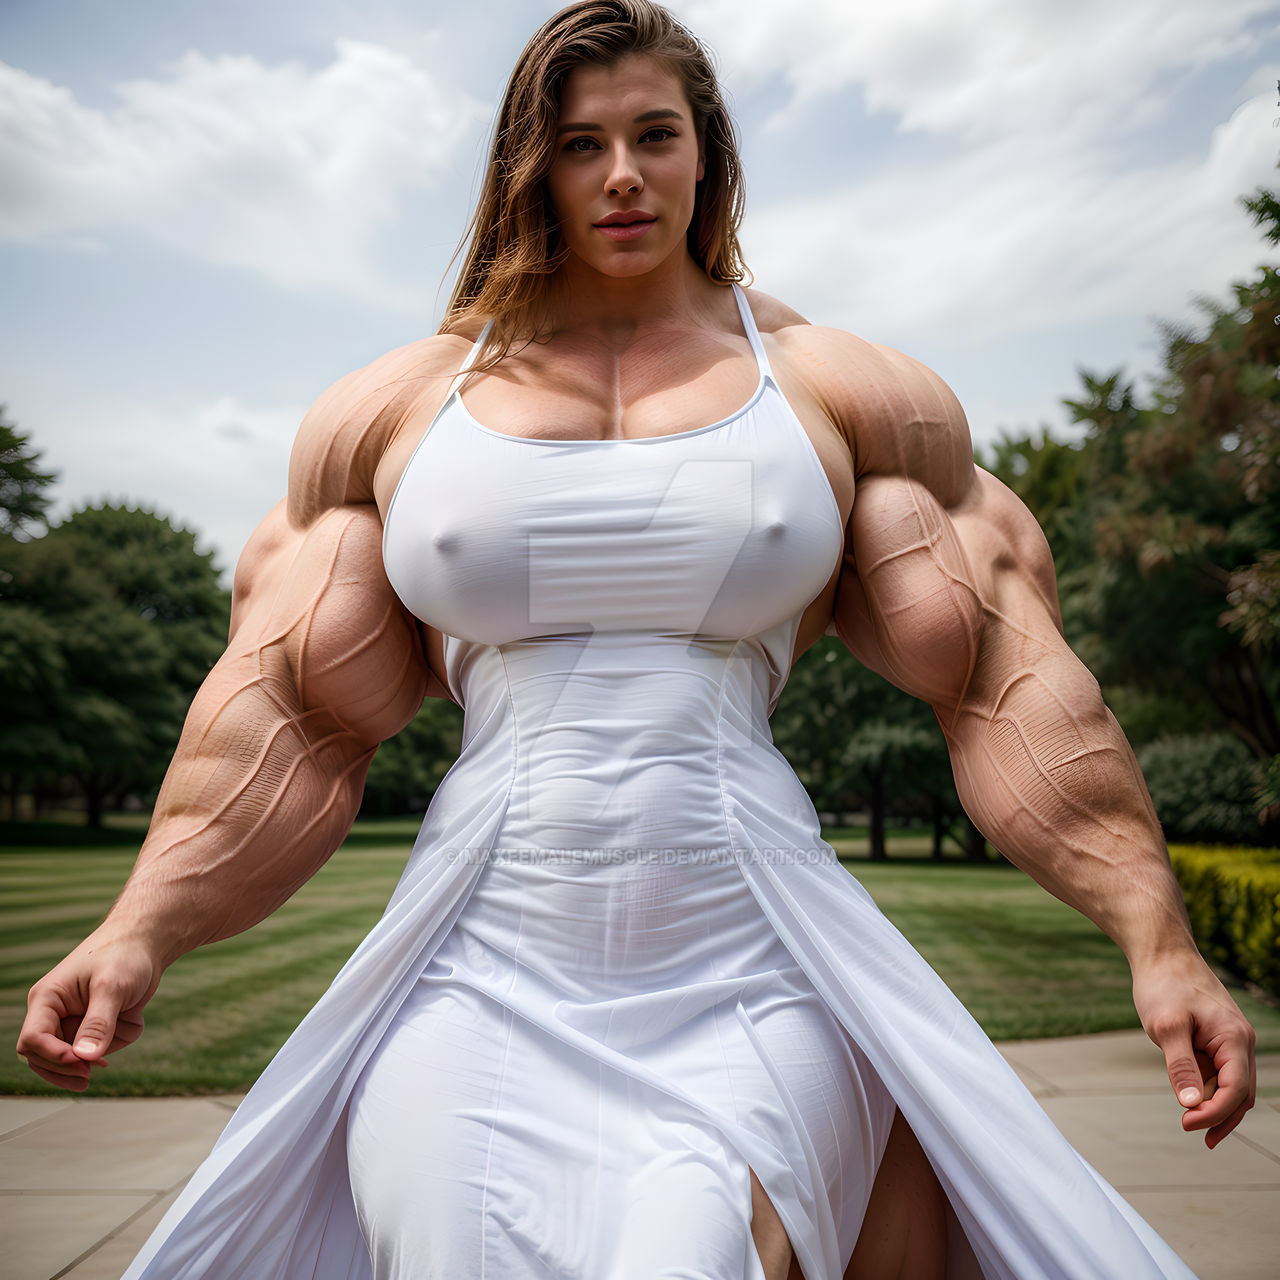 Muscle Girl in Dress by MaxFemaleMuscle on DeviantArt